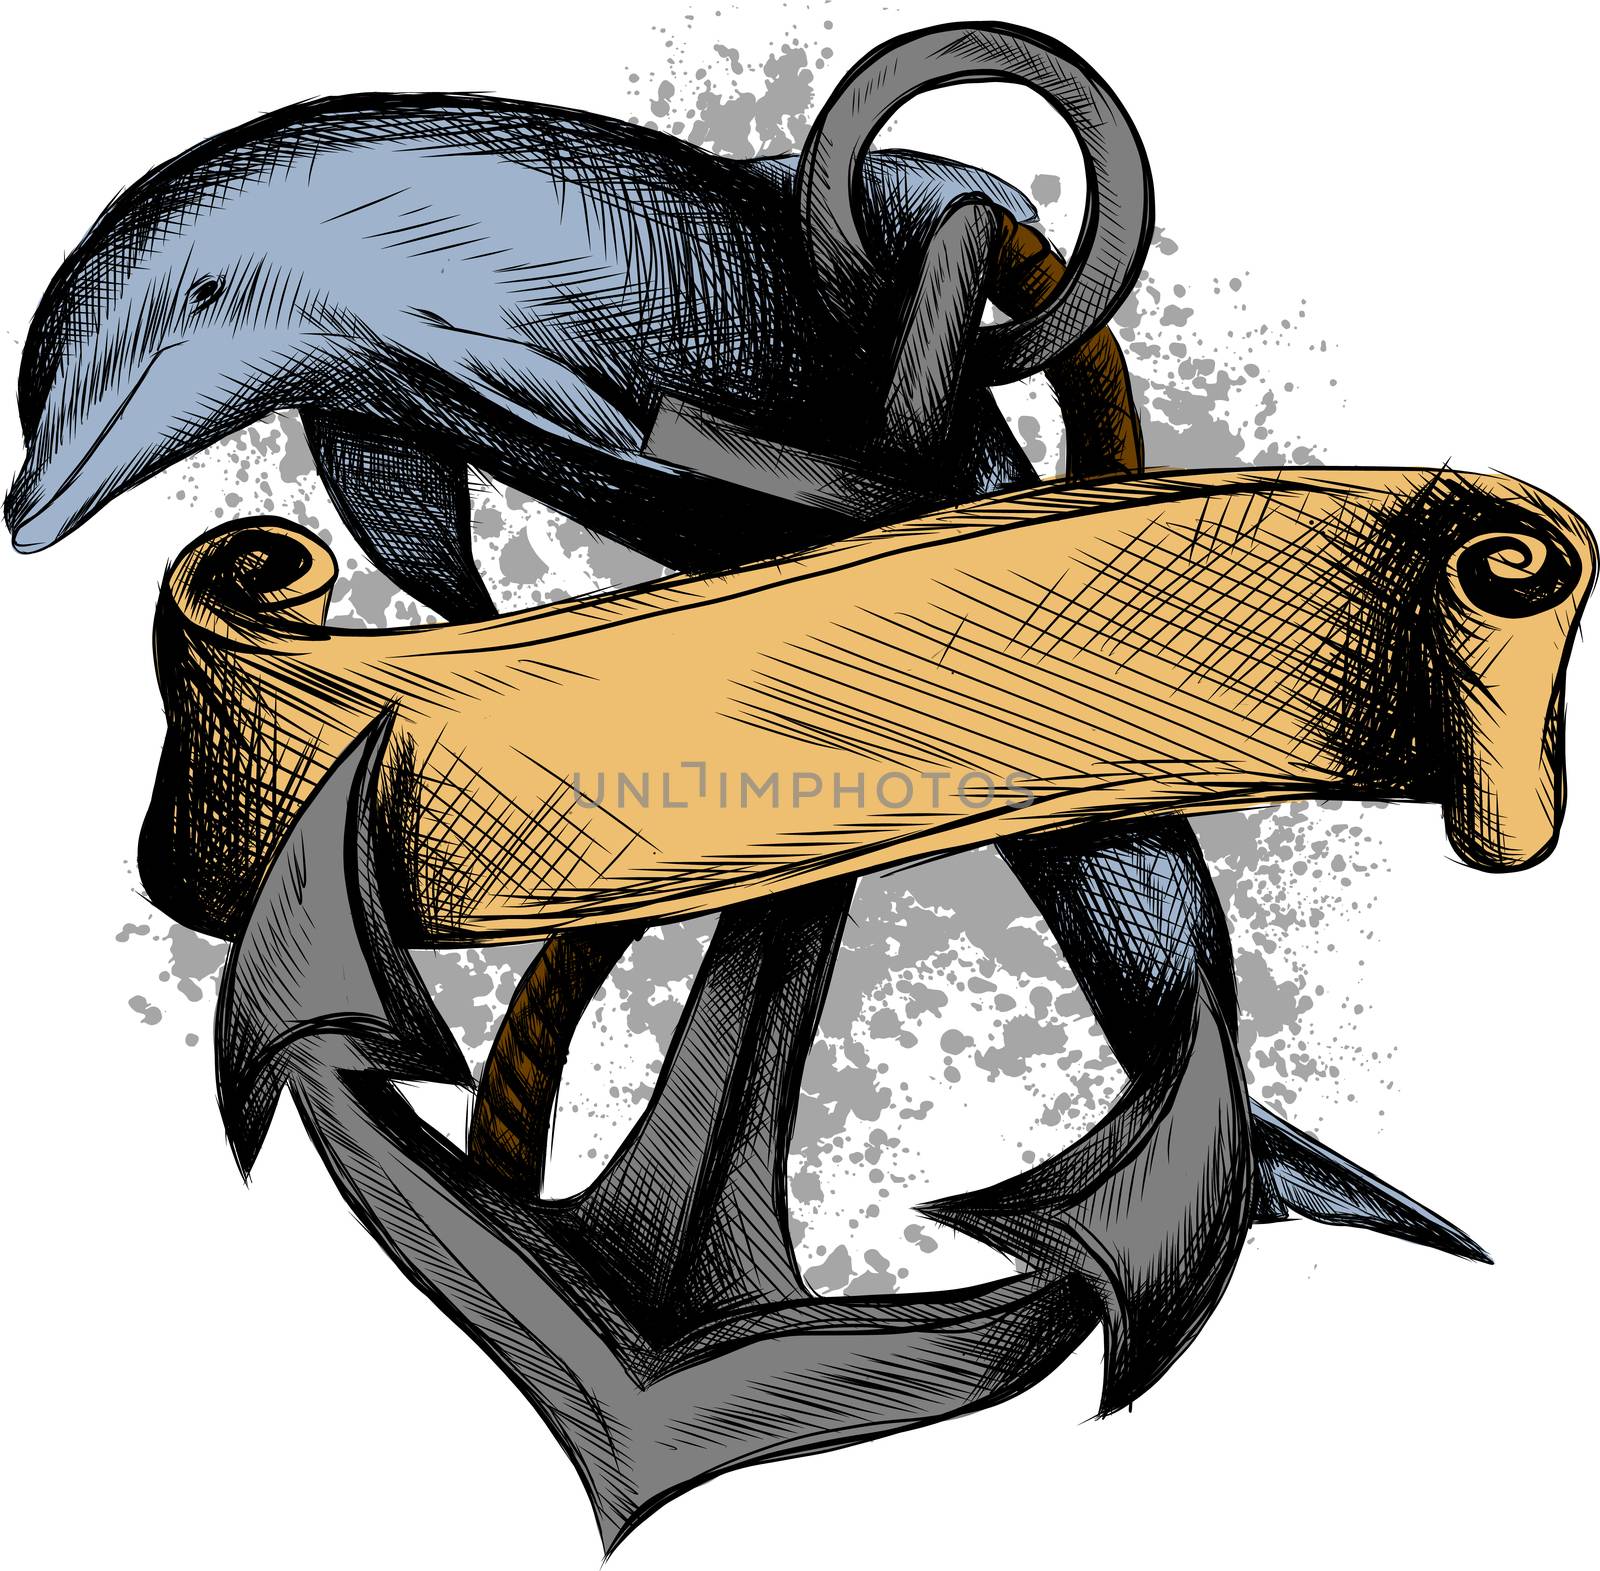 dolphin around an anchor with a rope, an ancient symbol of the sea, illustration by dean